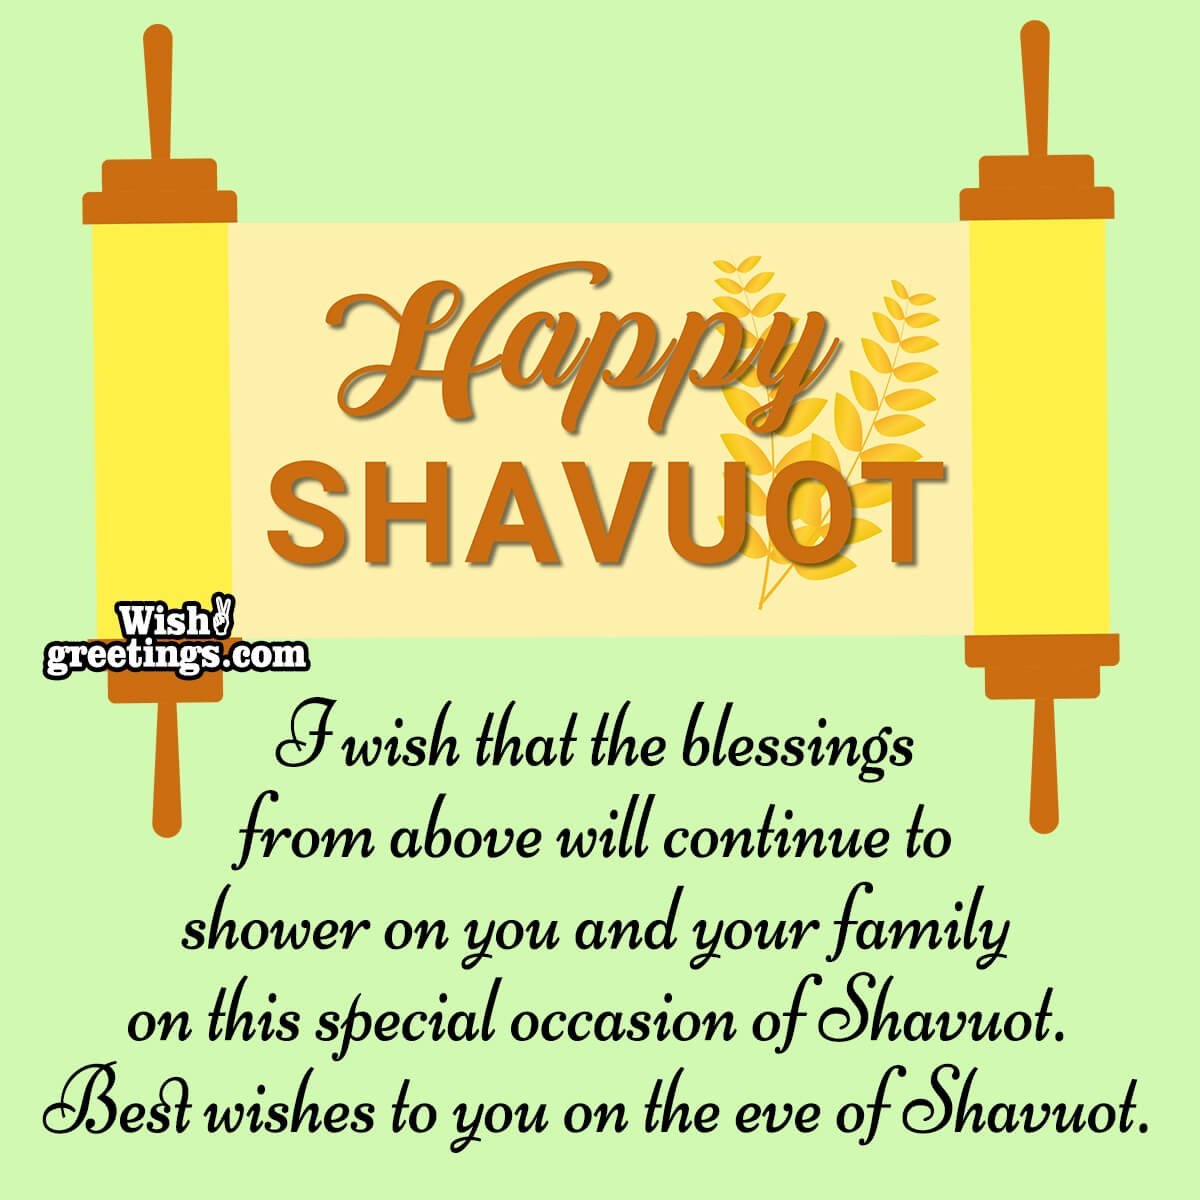 Happy Shavuot Wishes On The Eve